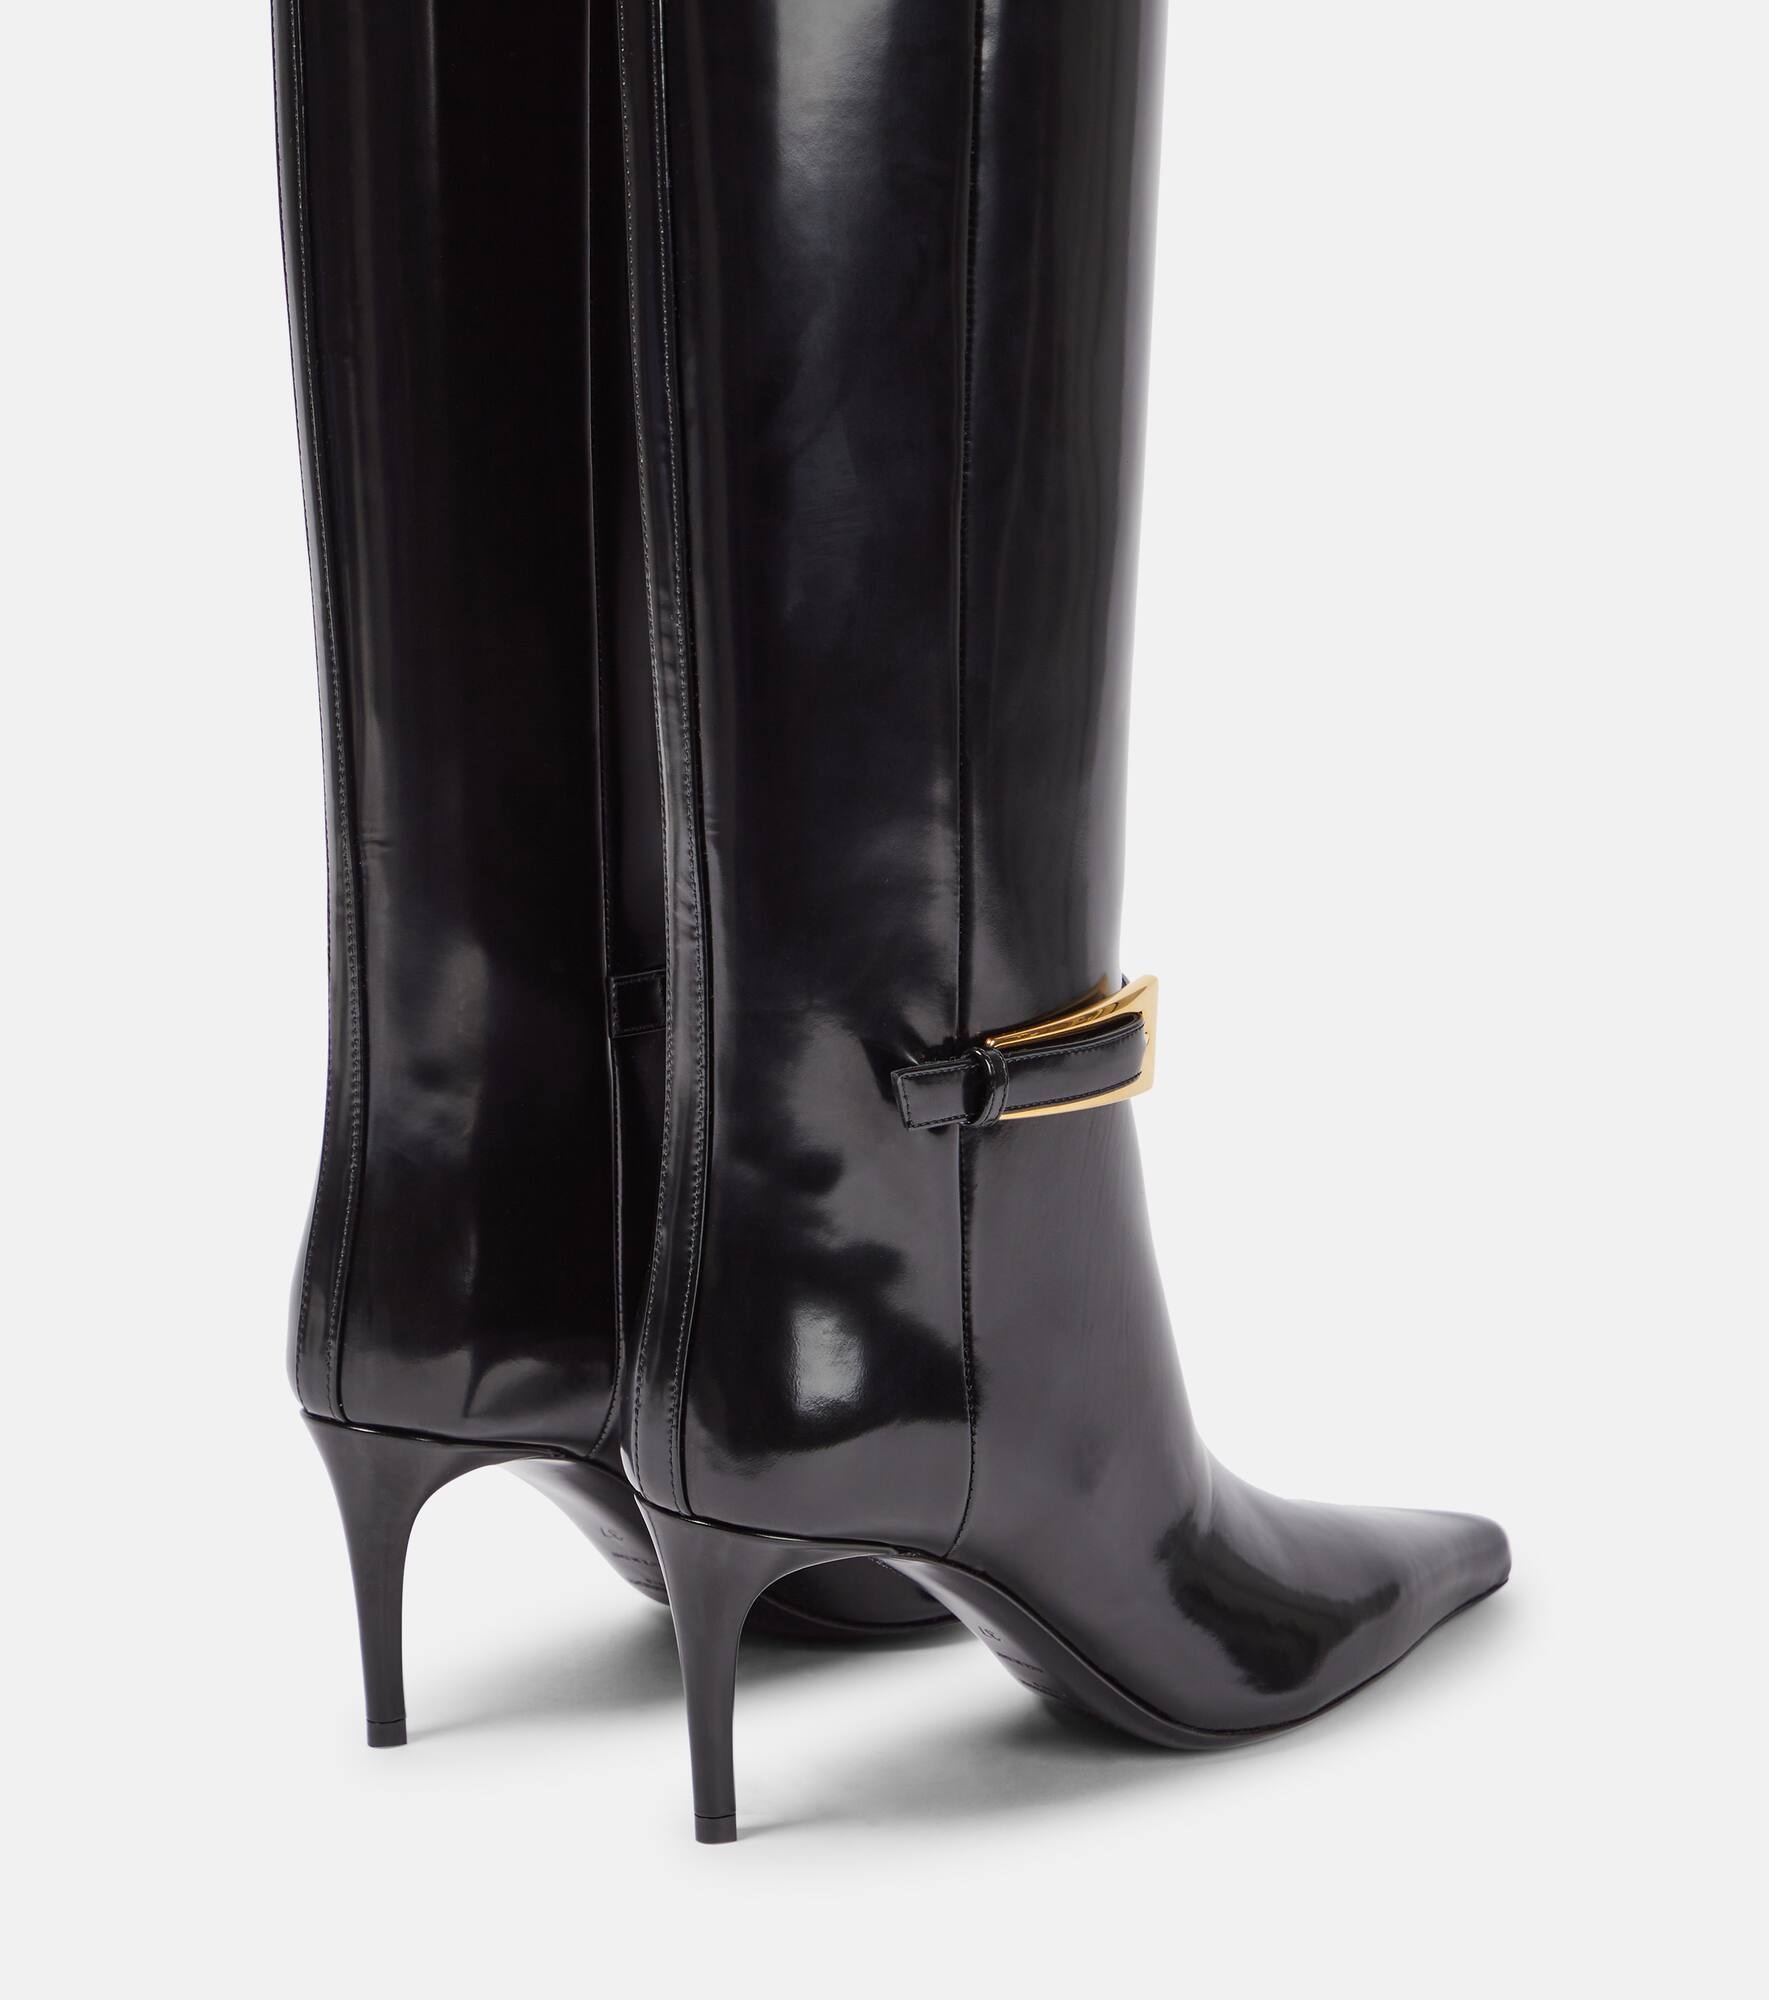 Lee glazed leather knee-high boots - 3